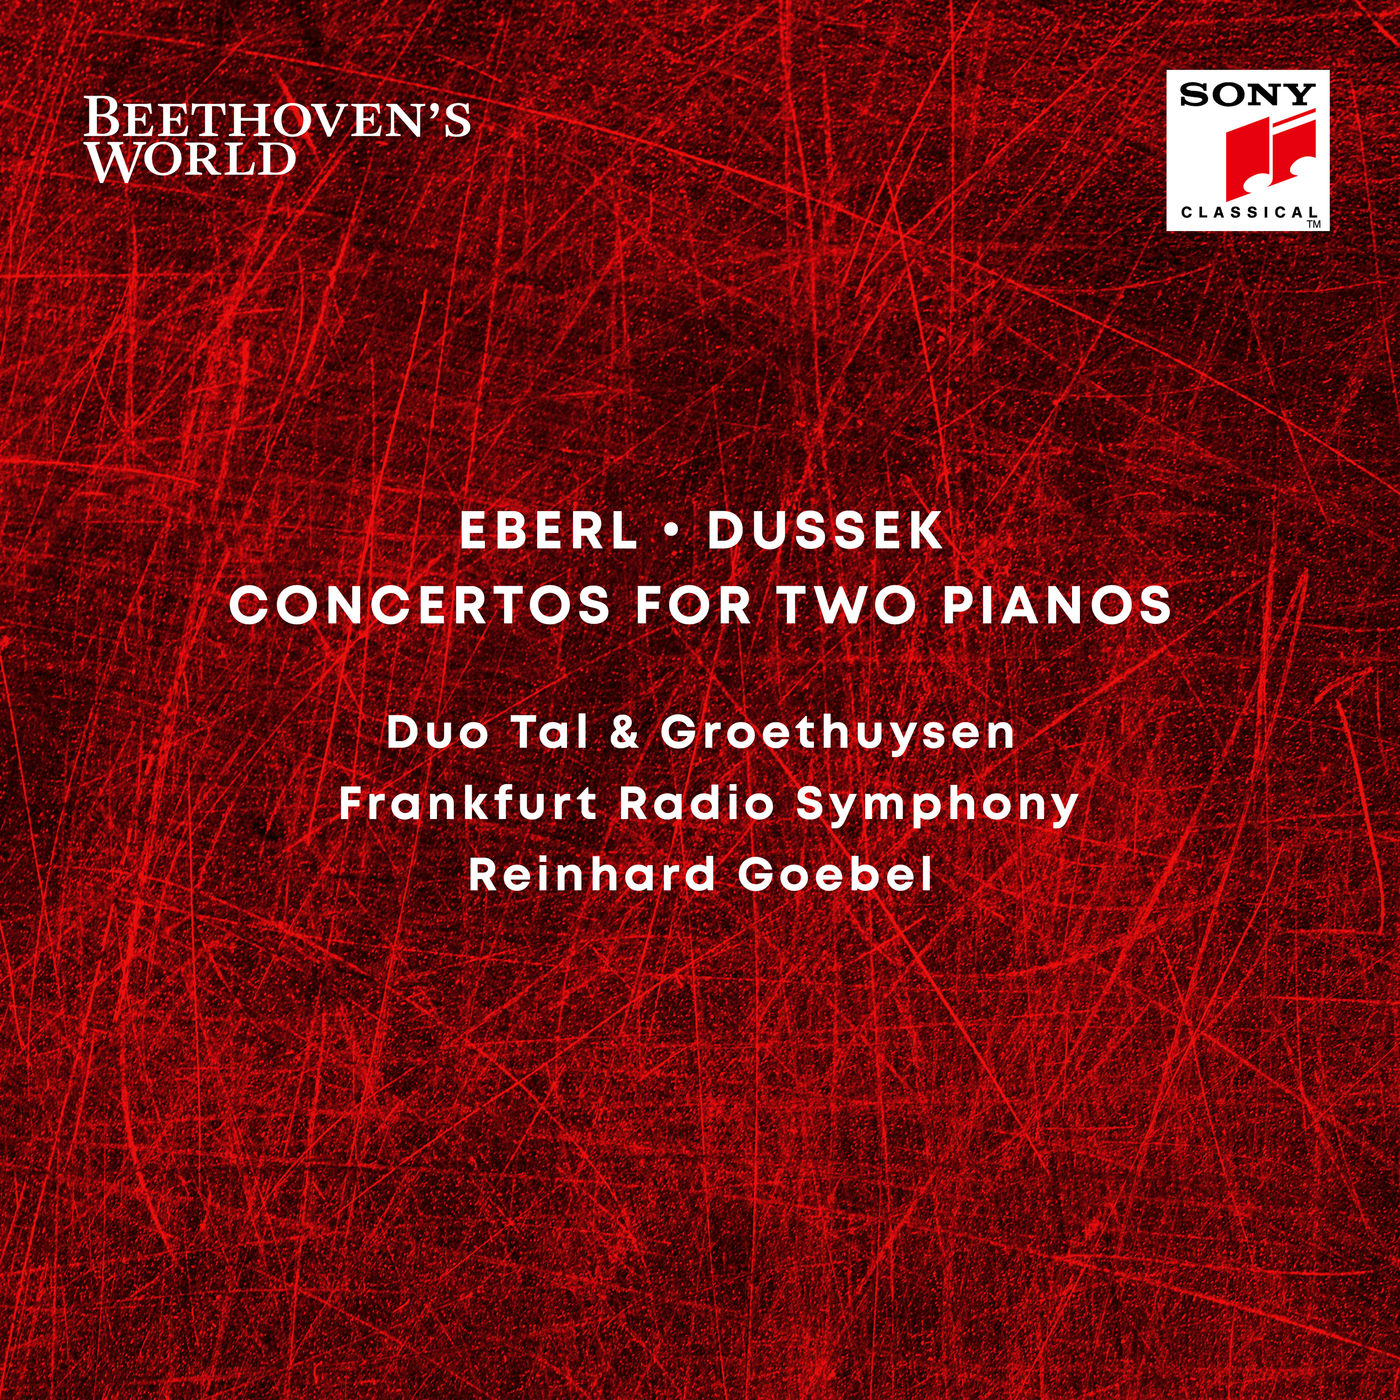 Tal & Groethuysen – Beethoven’s World – Eberl, Dussek Concertos for 2 Pianos (2020) [FLAC 24bit/48kHz]